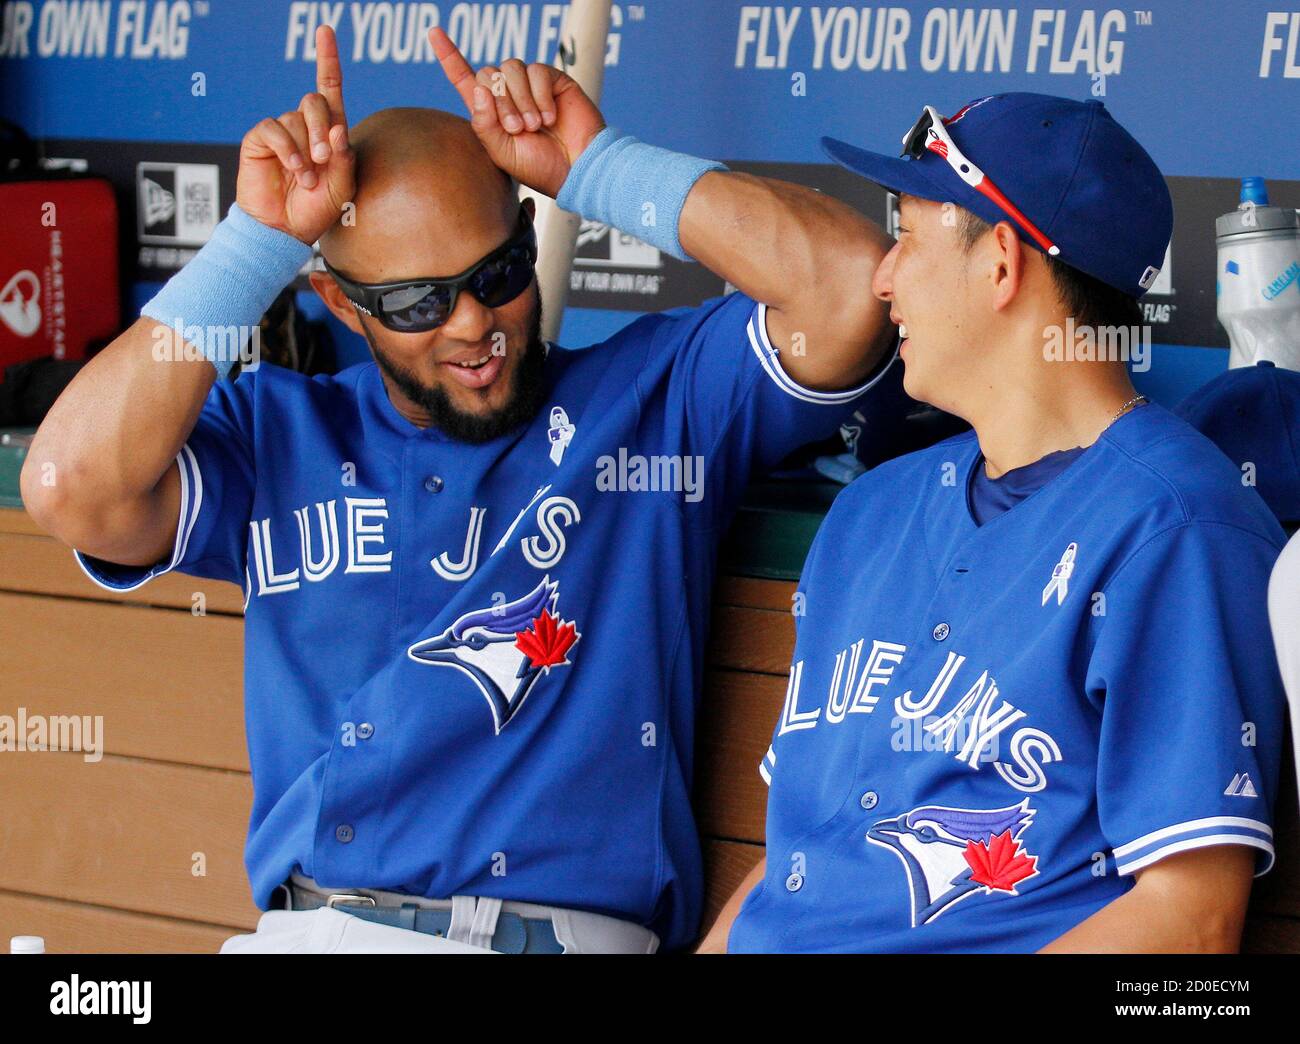 Toronto Blue Jays players Emilio Bonifacio (L) and Munenori Kawasaki (R) share a bit of humour in the dugout prior to the first inning of their MLB American League baseball game against the Texas Rangers in Arlington, Texas, June 16, 2013. REUTERS/Tim Sharp (UNITED STATES - Tags: SPORT BASEBALL) Stock Photo